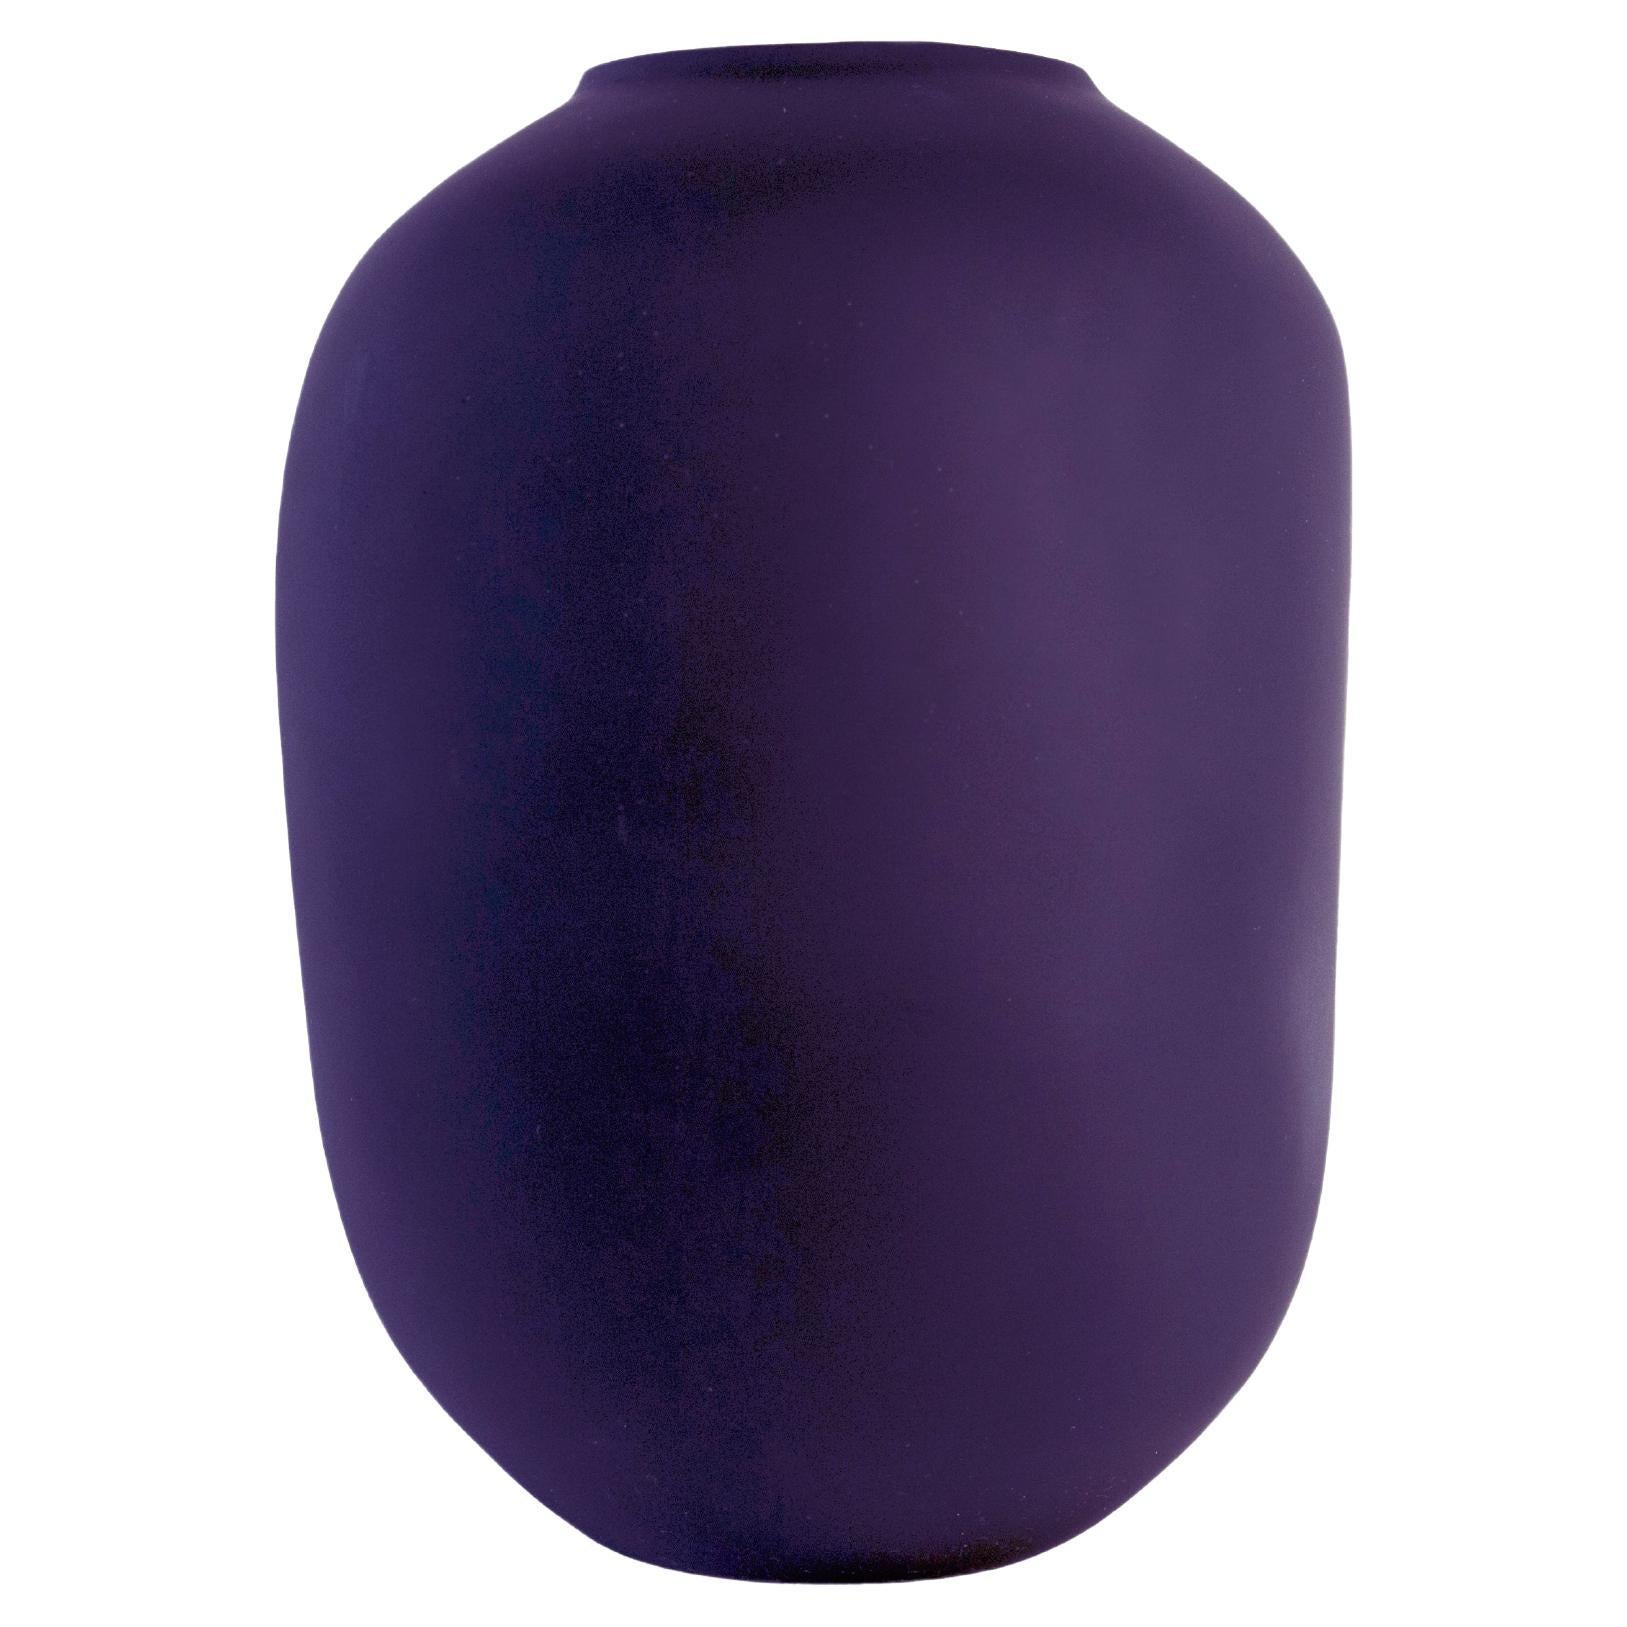 Modern 21st Century "Purple High Tara" Resin Vase from Mexico For Sale